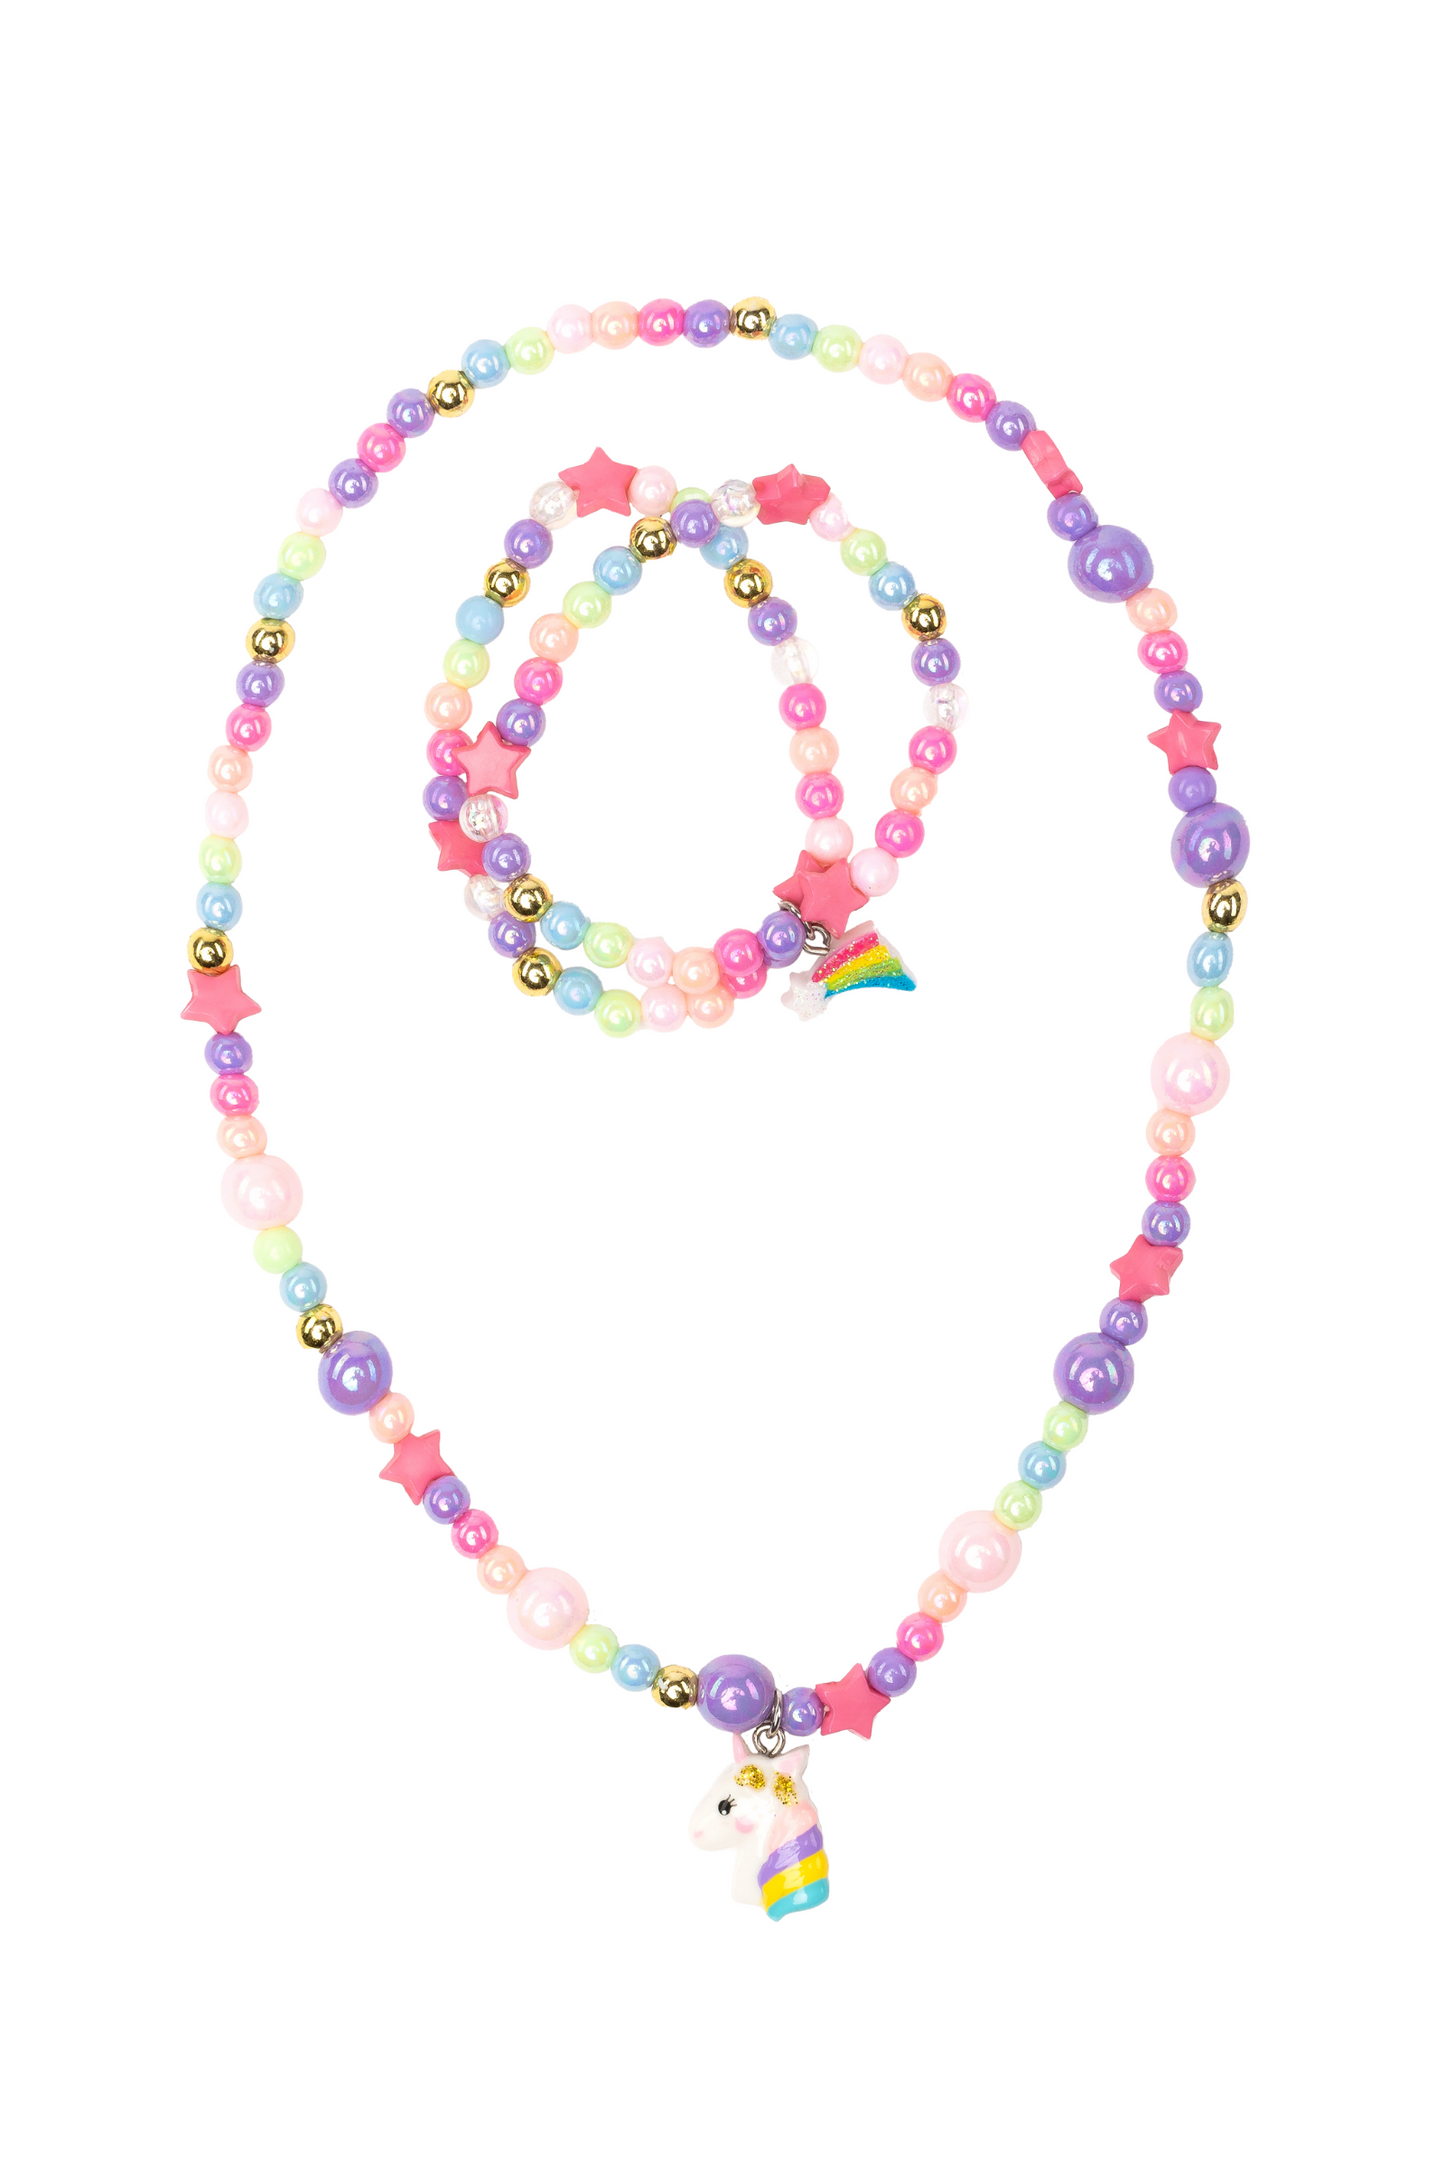 the cheerful starry unicorn necklace and bracelet set on a white background